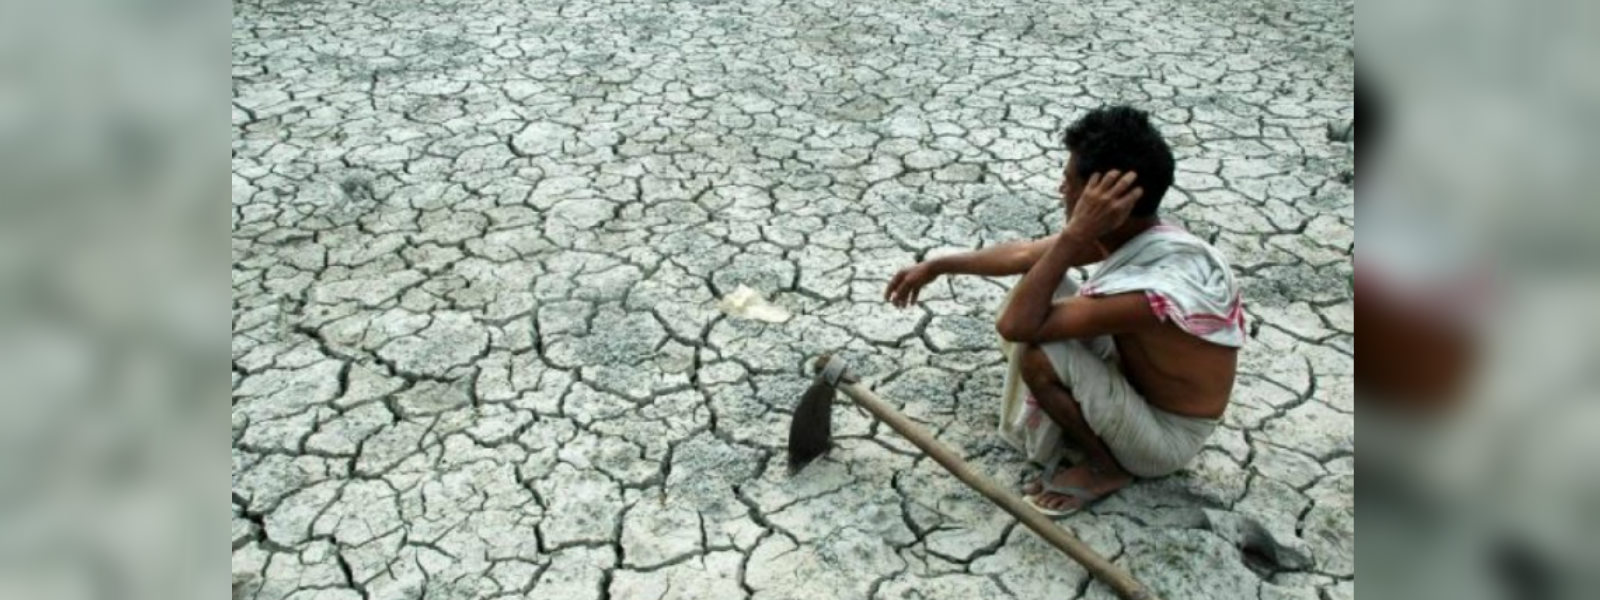 Over 350,000 affected by the drought - DMC